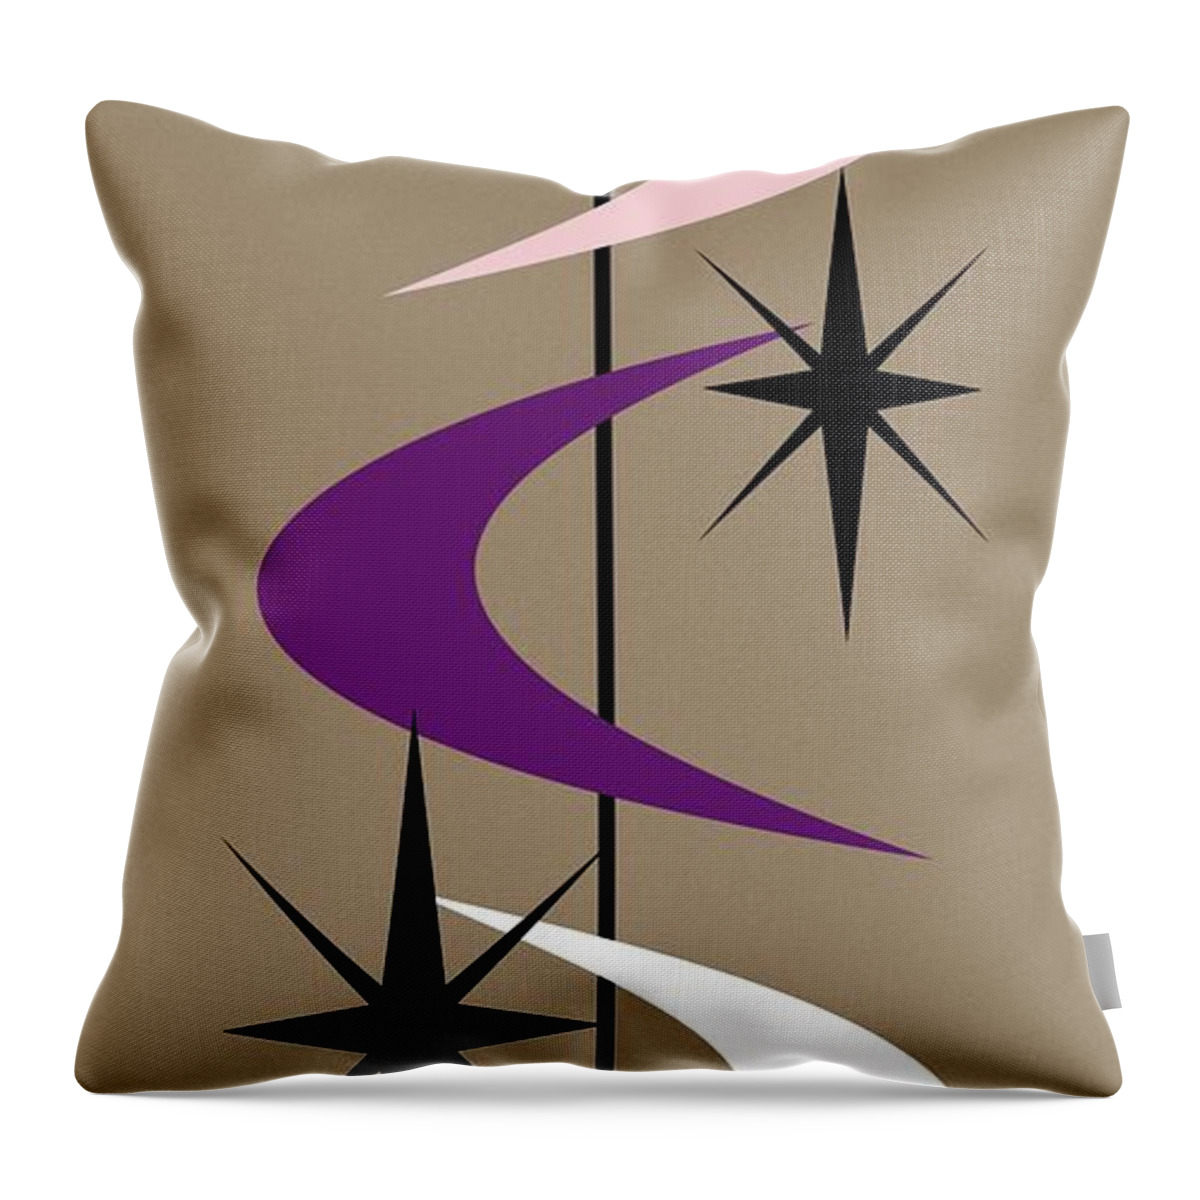  Throw Pillow featuring the digital art Mid Century Boomerangs Purple Pink White by Donna Mibus